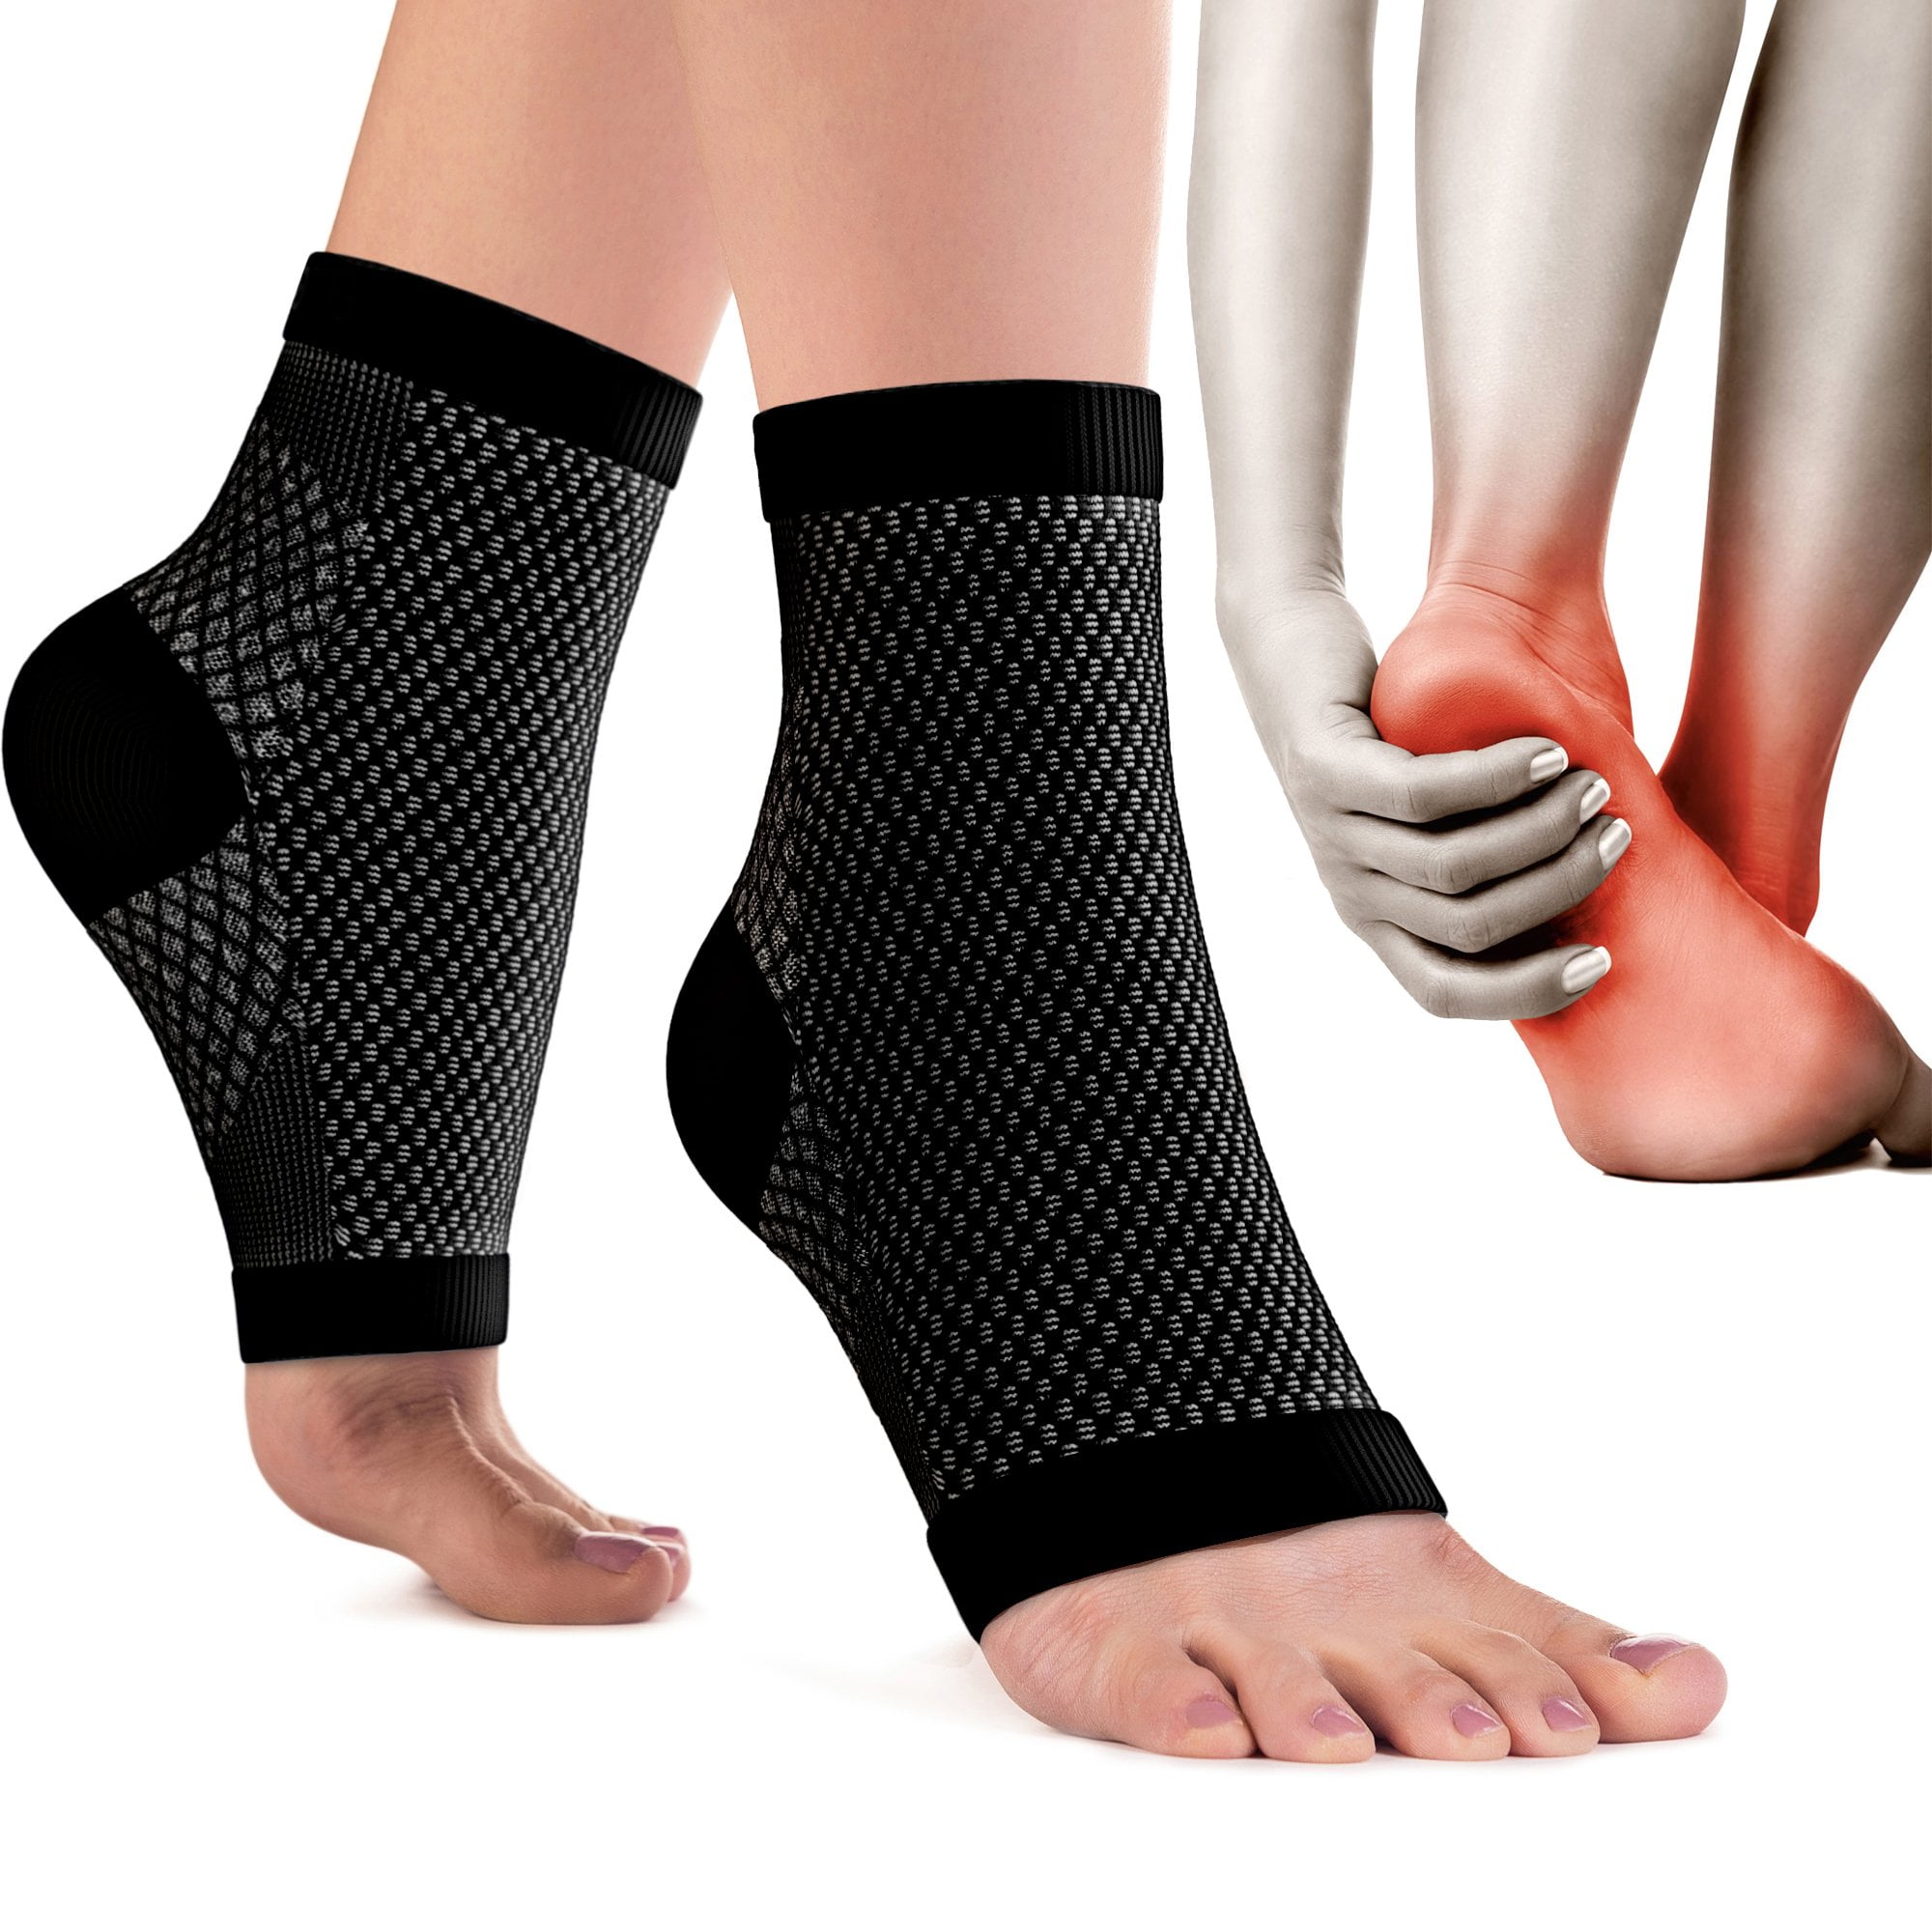 Plantar Fasciitis Socks - 7 Zone Compression Ankle Sleeves for Fast Foot  Pain Relief